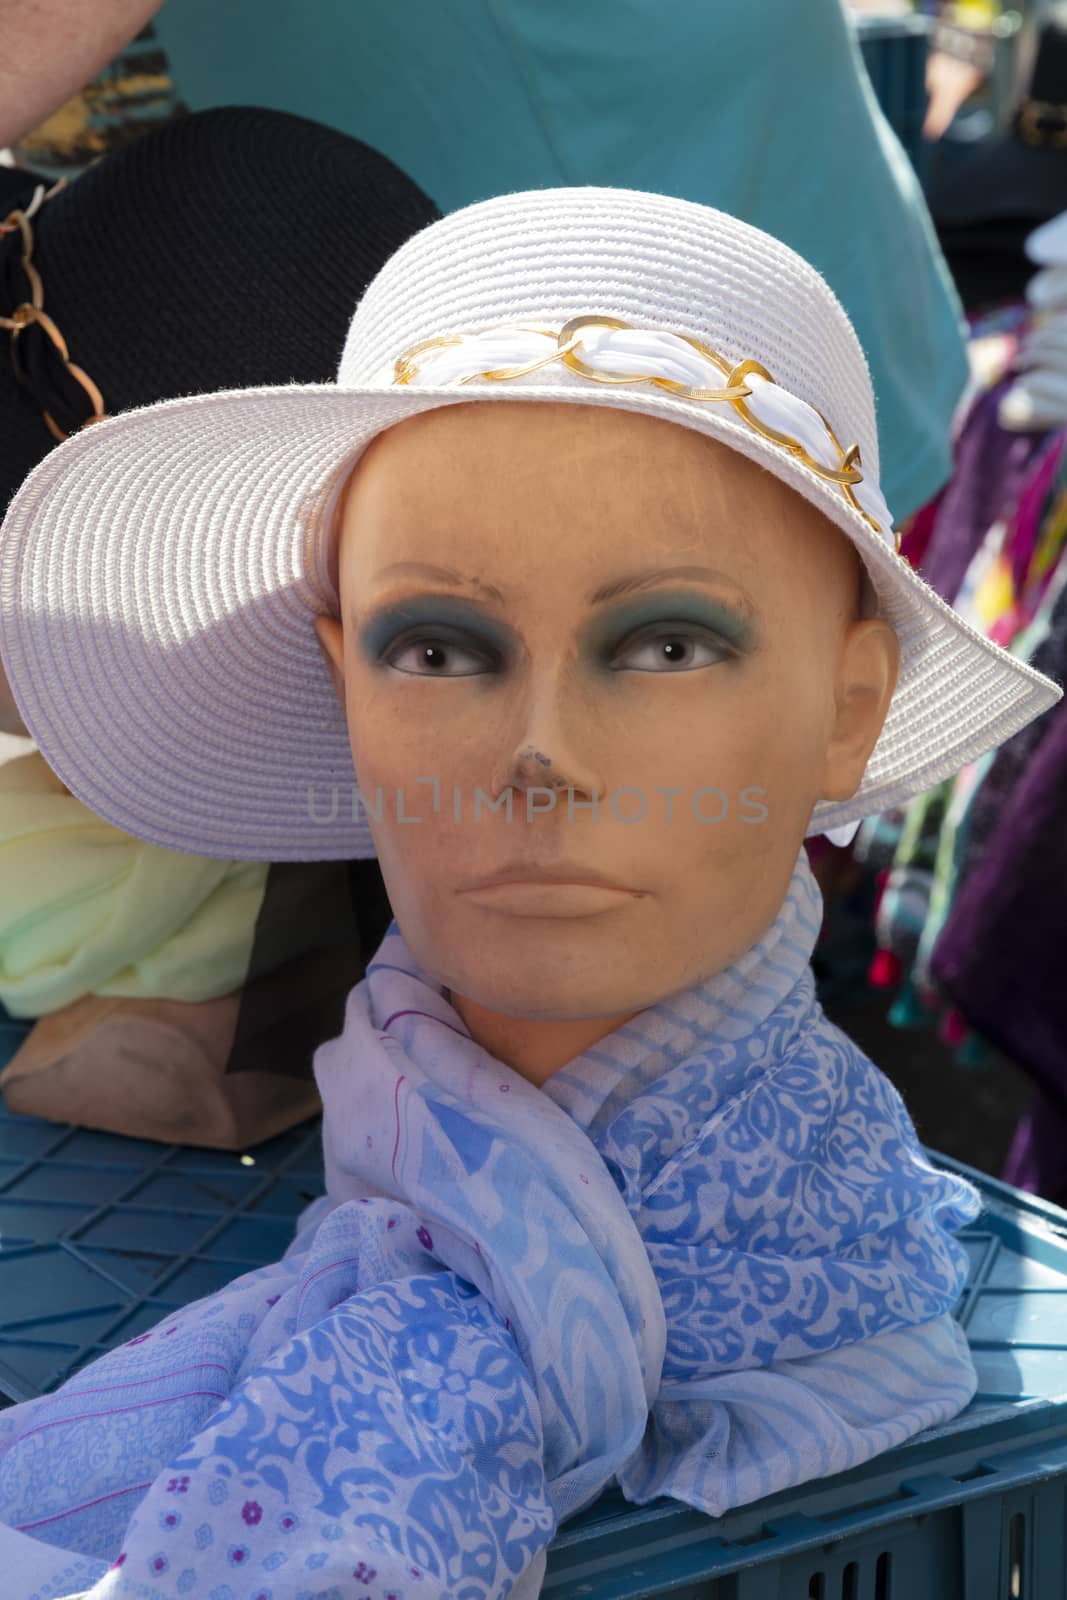 Woman mannequin with hat and scarf at open market retail display